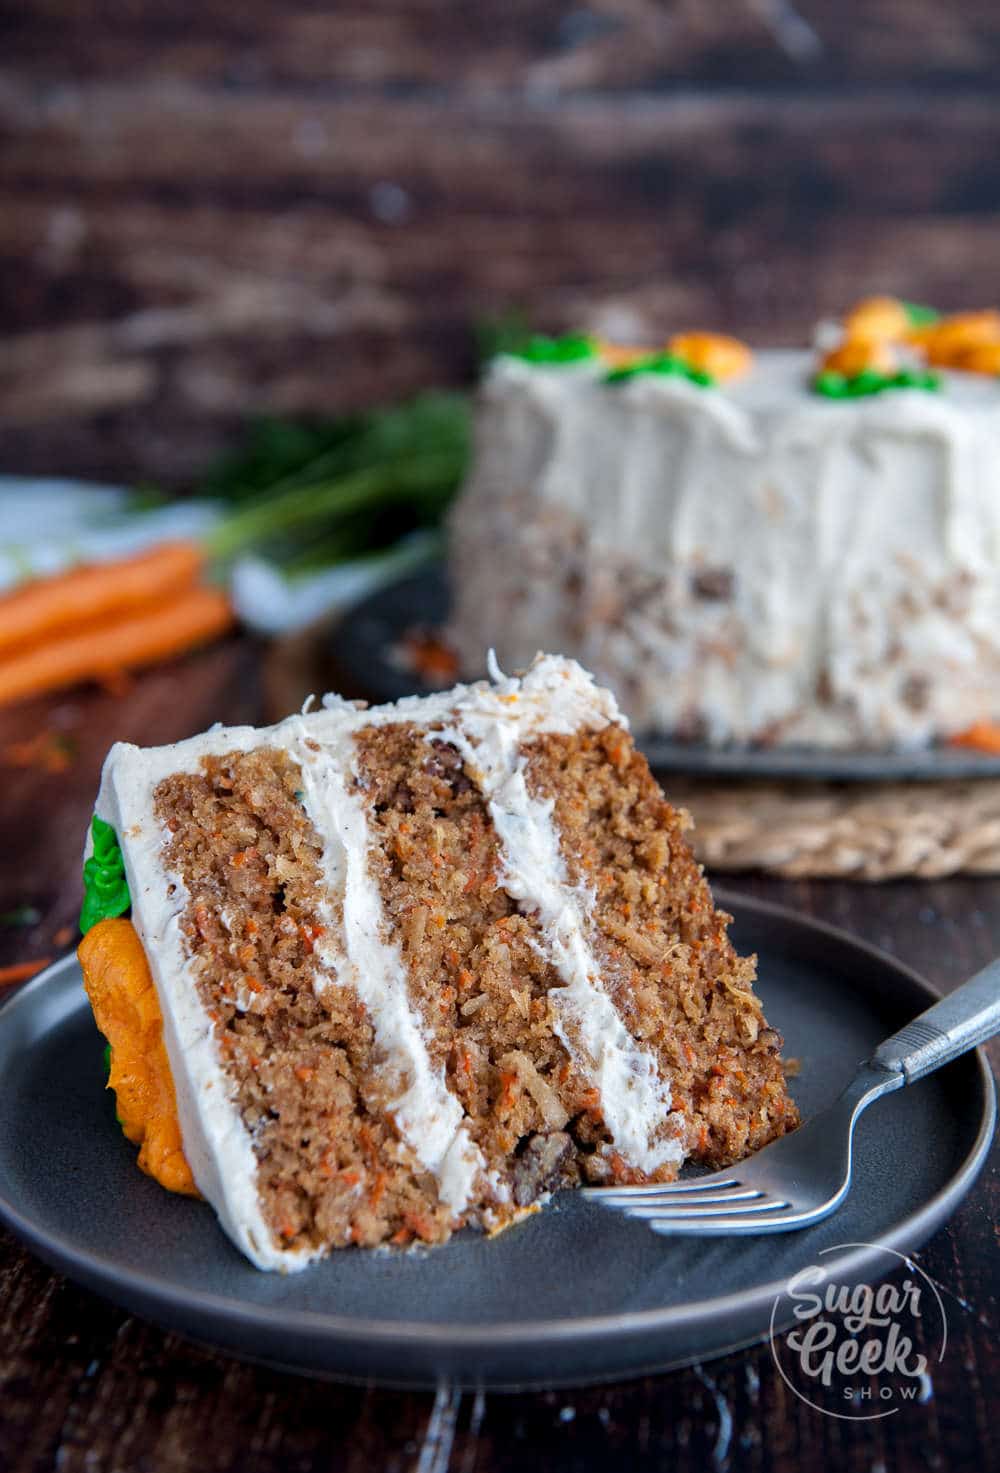 carrot cake with pineapple, candied pecans, toasted coconut and big chunks of carrots. Frosted with brown butter cream cheese frosting